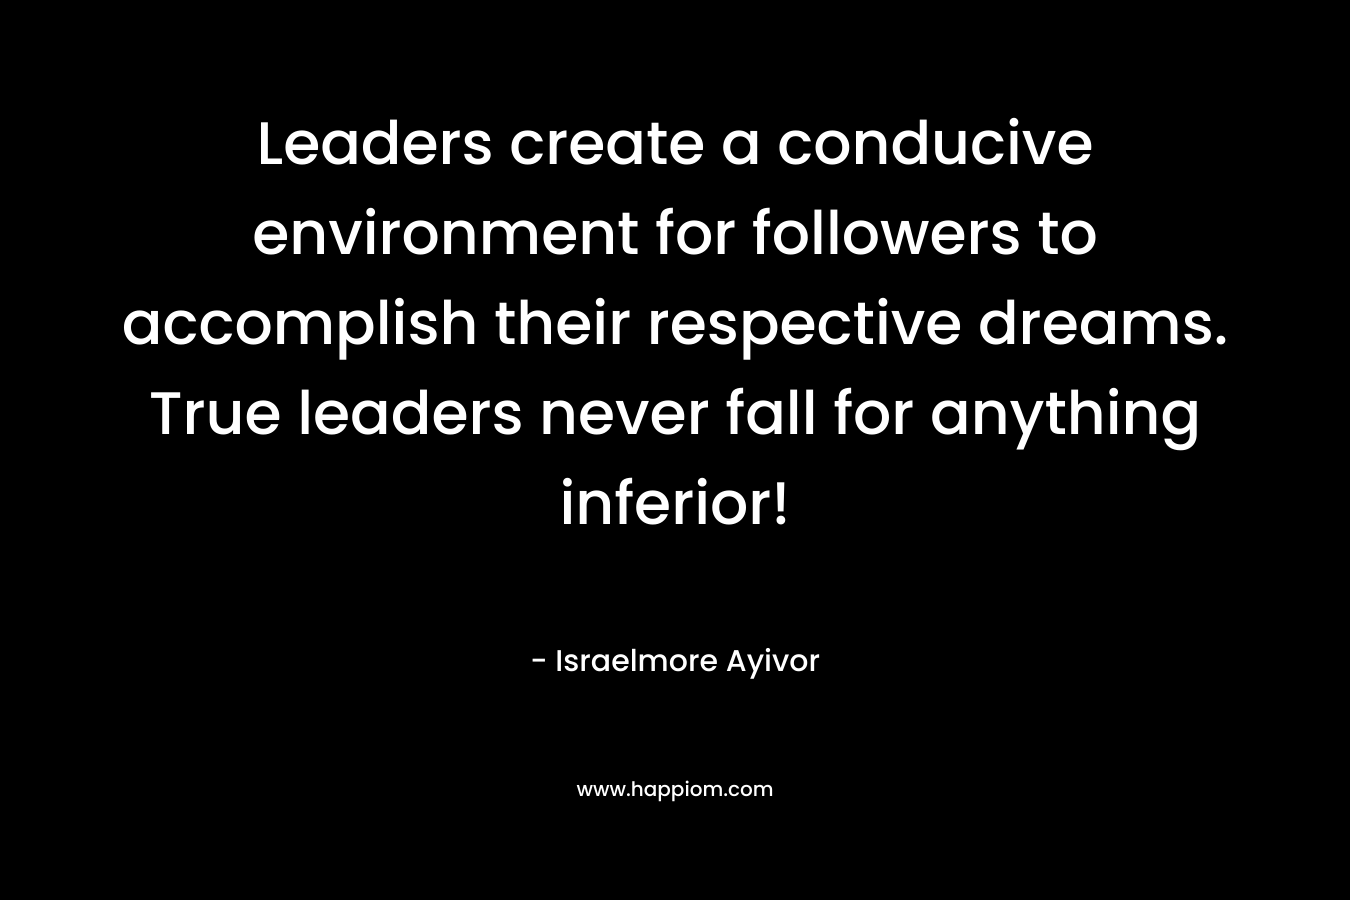 Leaders create a conducive environment for followers to accomplish their respective dreams. True leaders never fall for anything inferior!